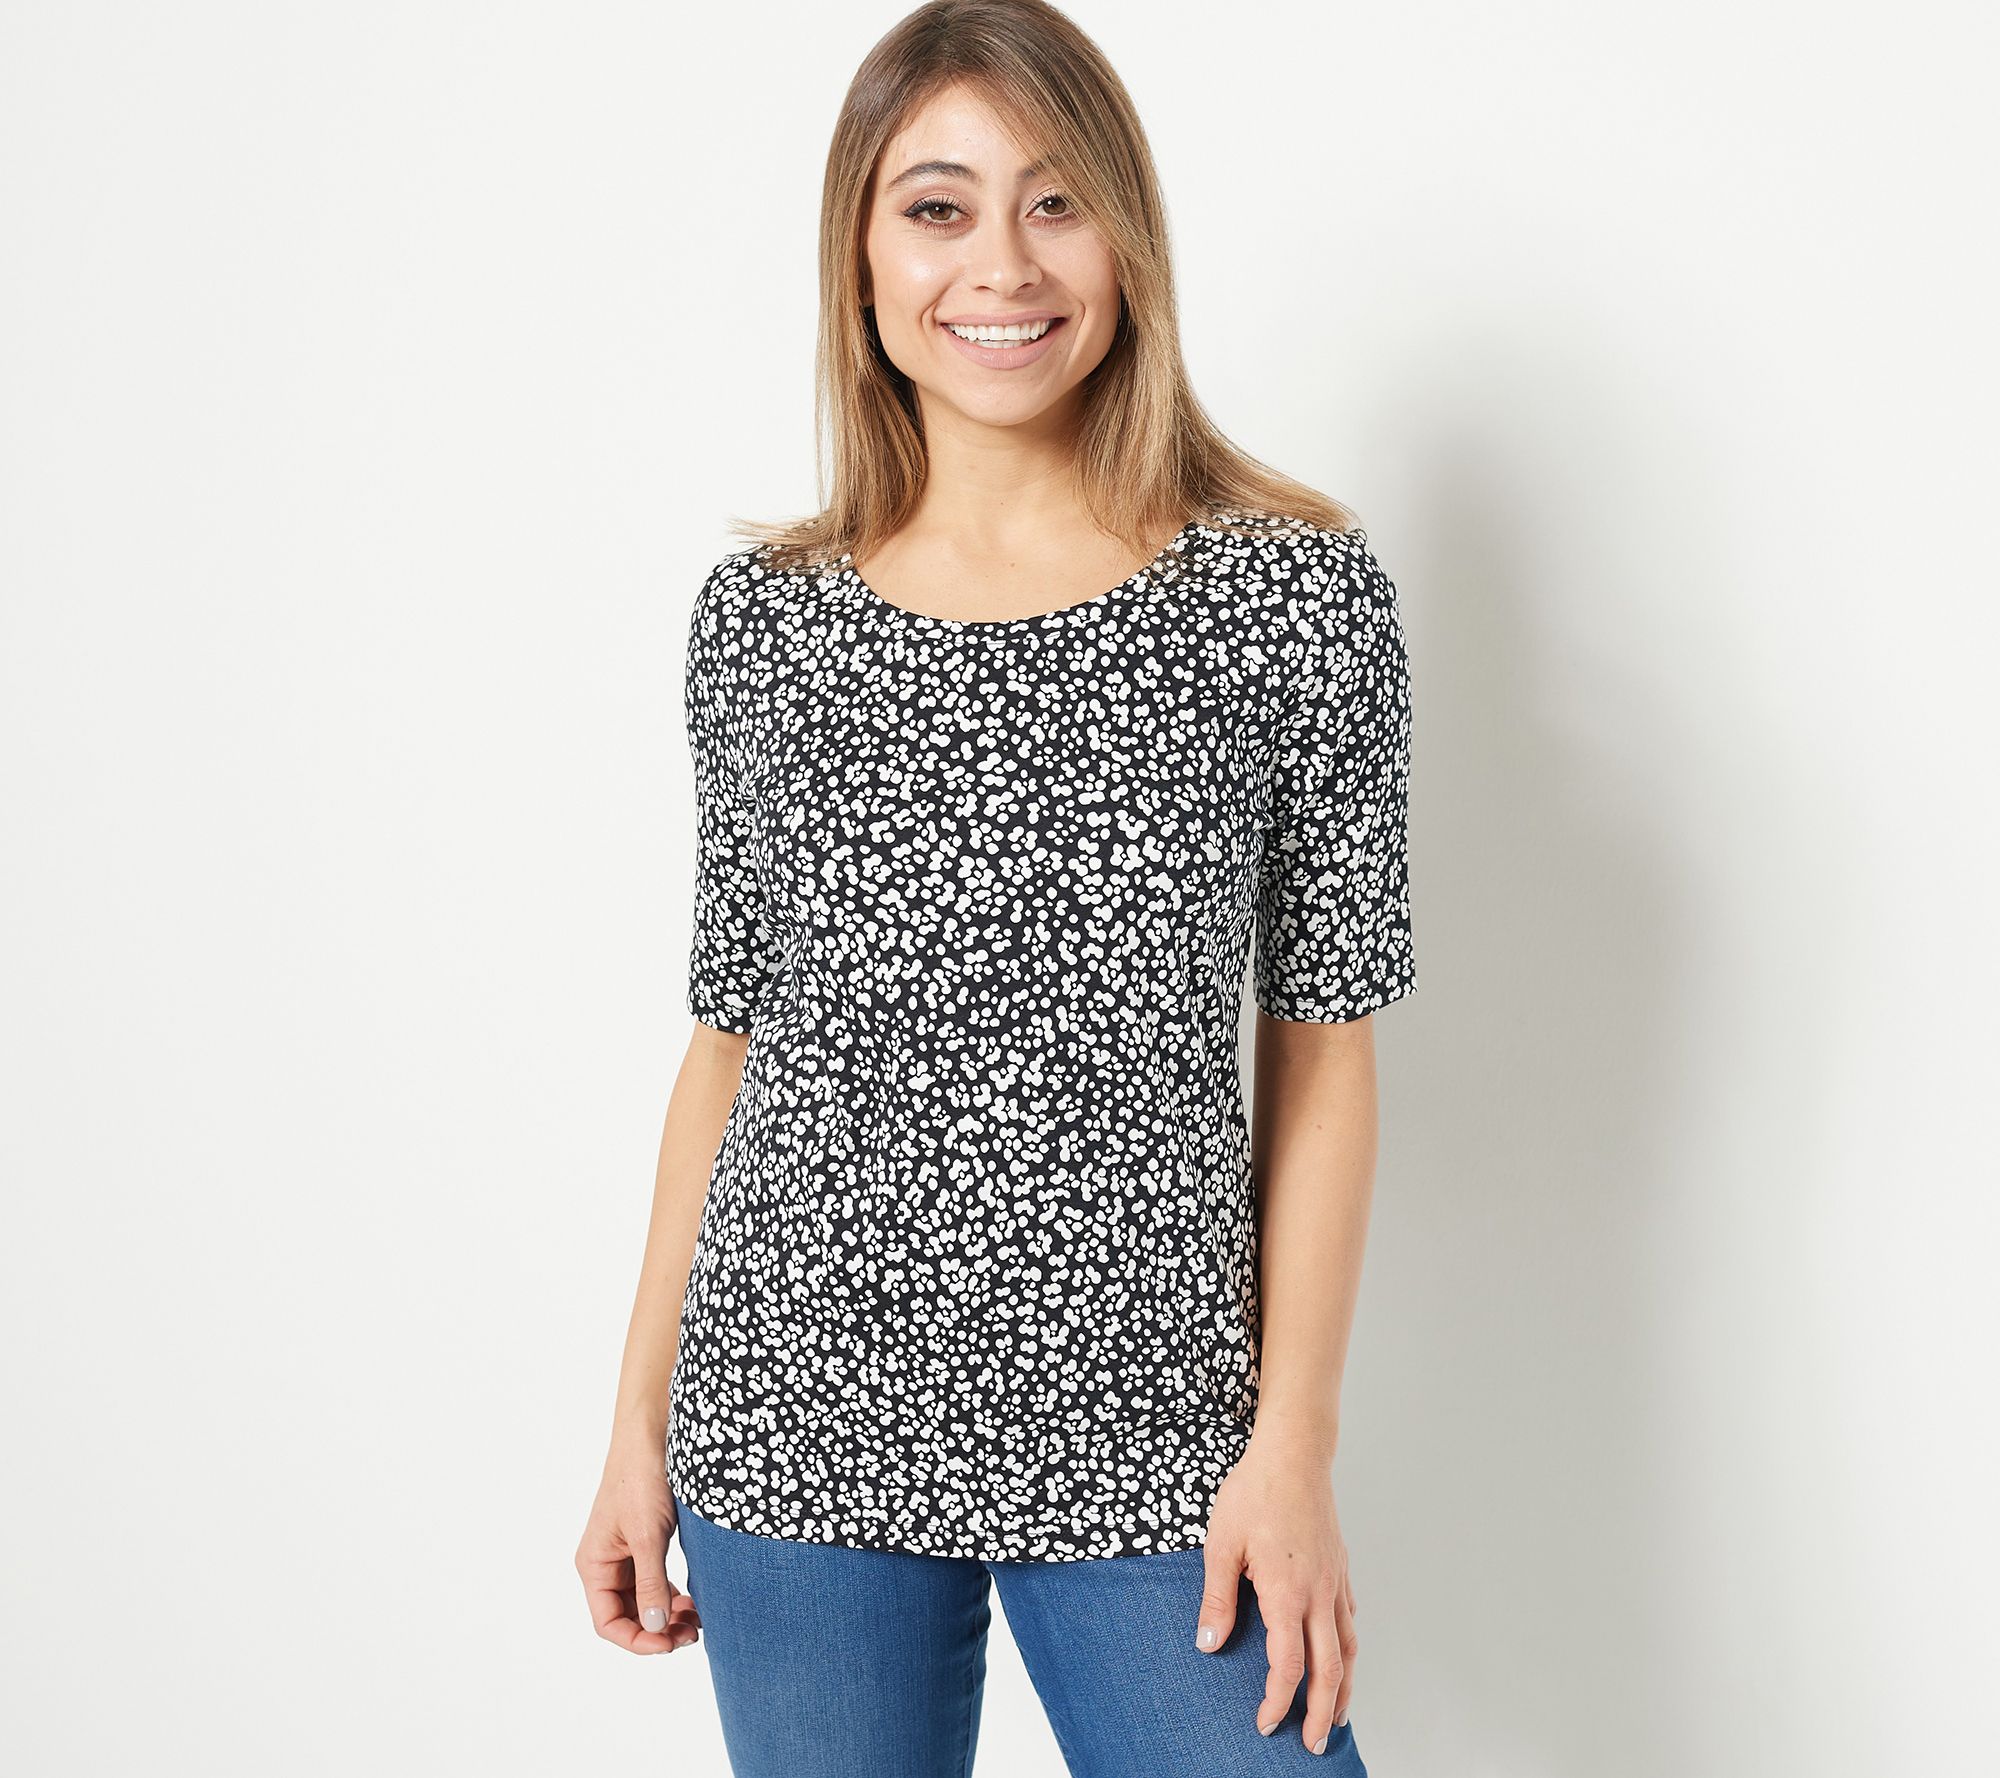 Women's White and Red Dots Adaptive Blouse - Smart Adaptive Clothing